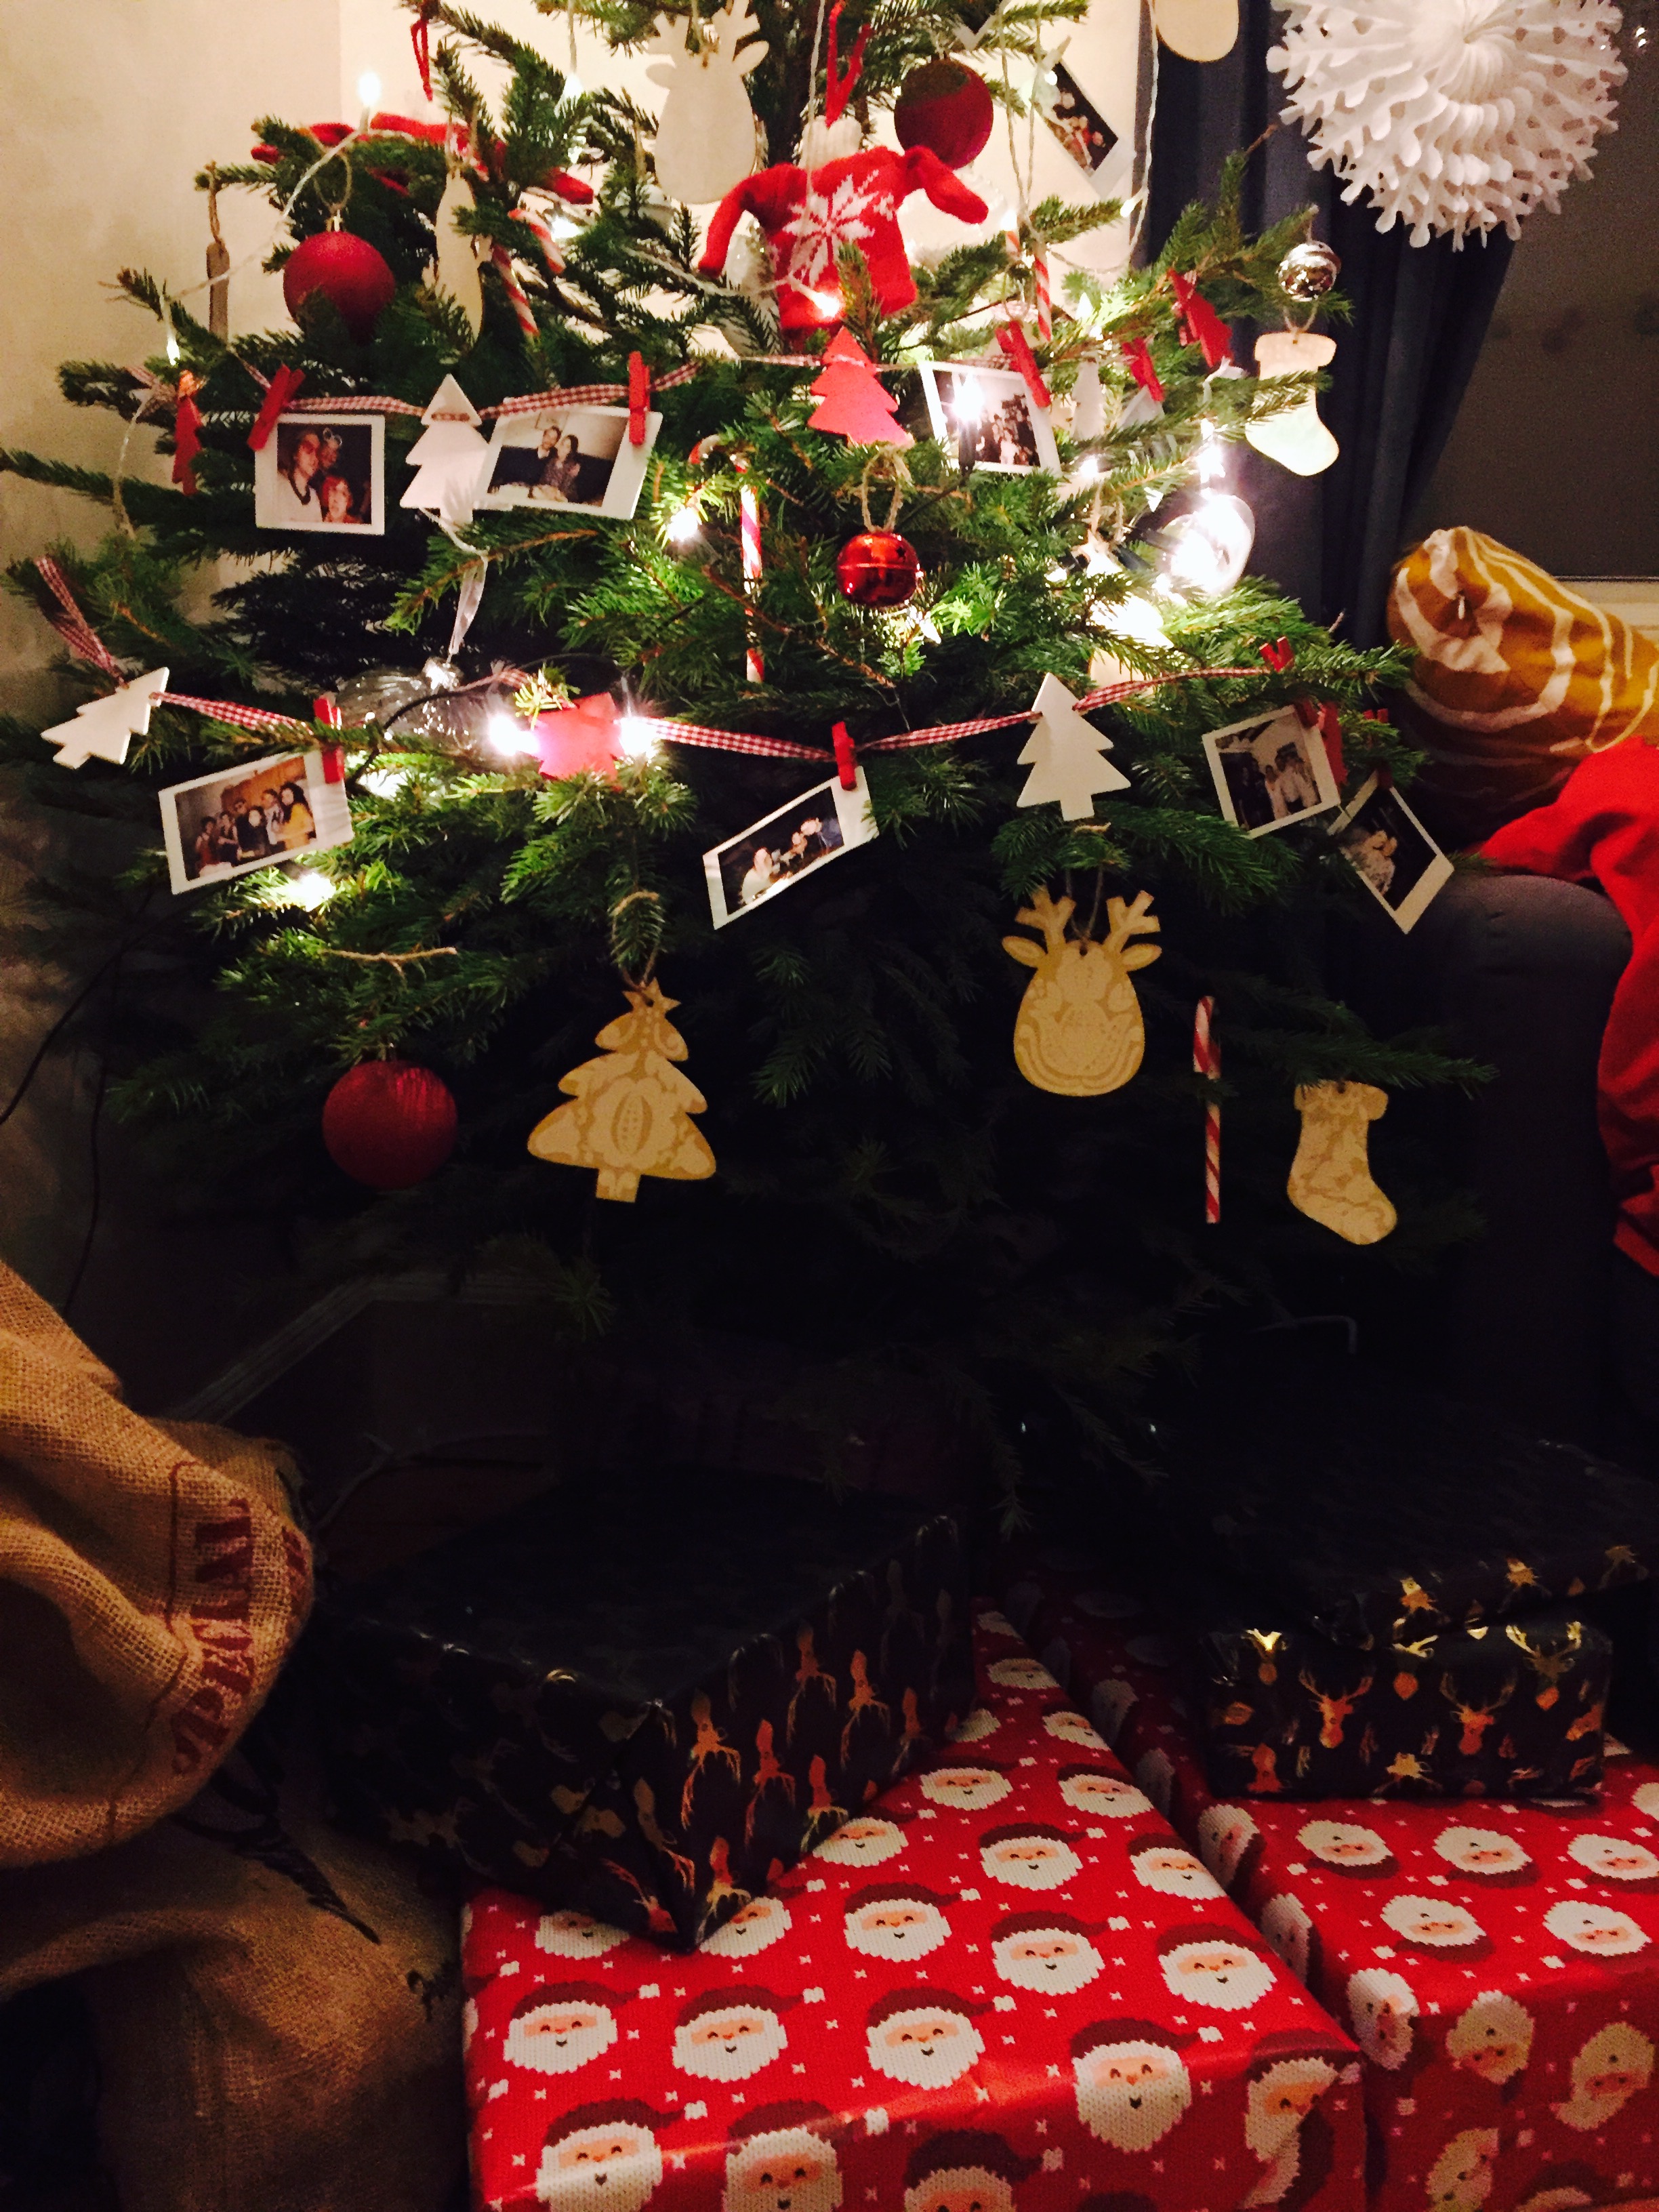 A Christmas tree full of polaroid pictures and handpainted decorations